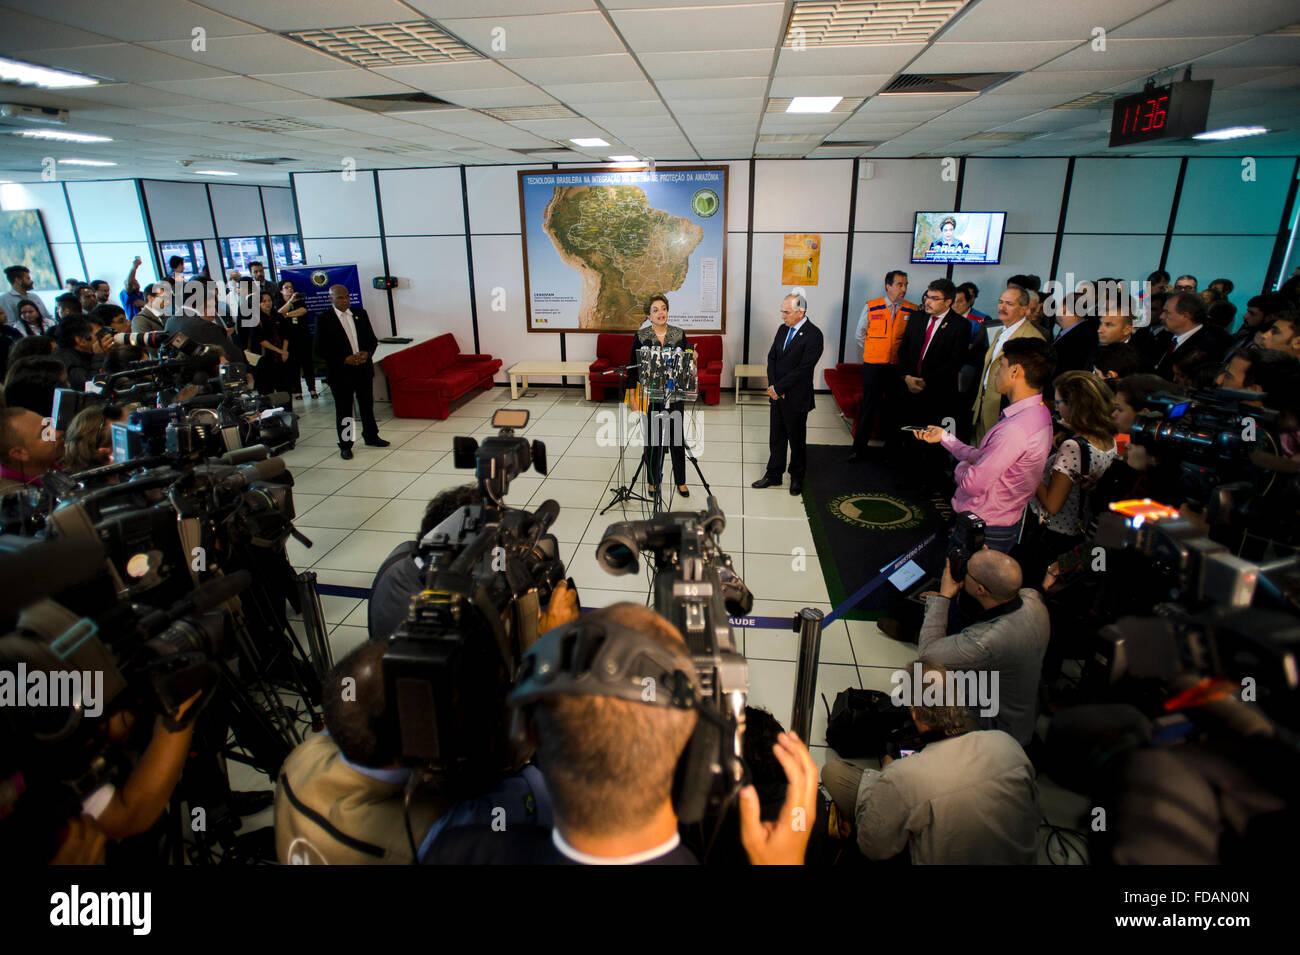 Brasilia, Brazil. 29th Jan, 2016. Brazil President Dilma Rousseff holds a news conference on combating the Zika virus outbreak at the National Center for Risk and Disaster Management January 29, 2016 in Brasilia, Brazil. Rousseff called on Brazilian to help combat the spread of the Zika virus, which has been linked to birth defects. Stock Photo